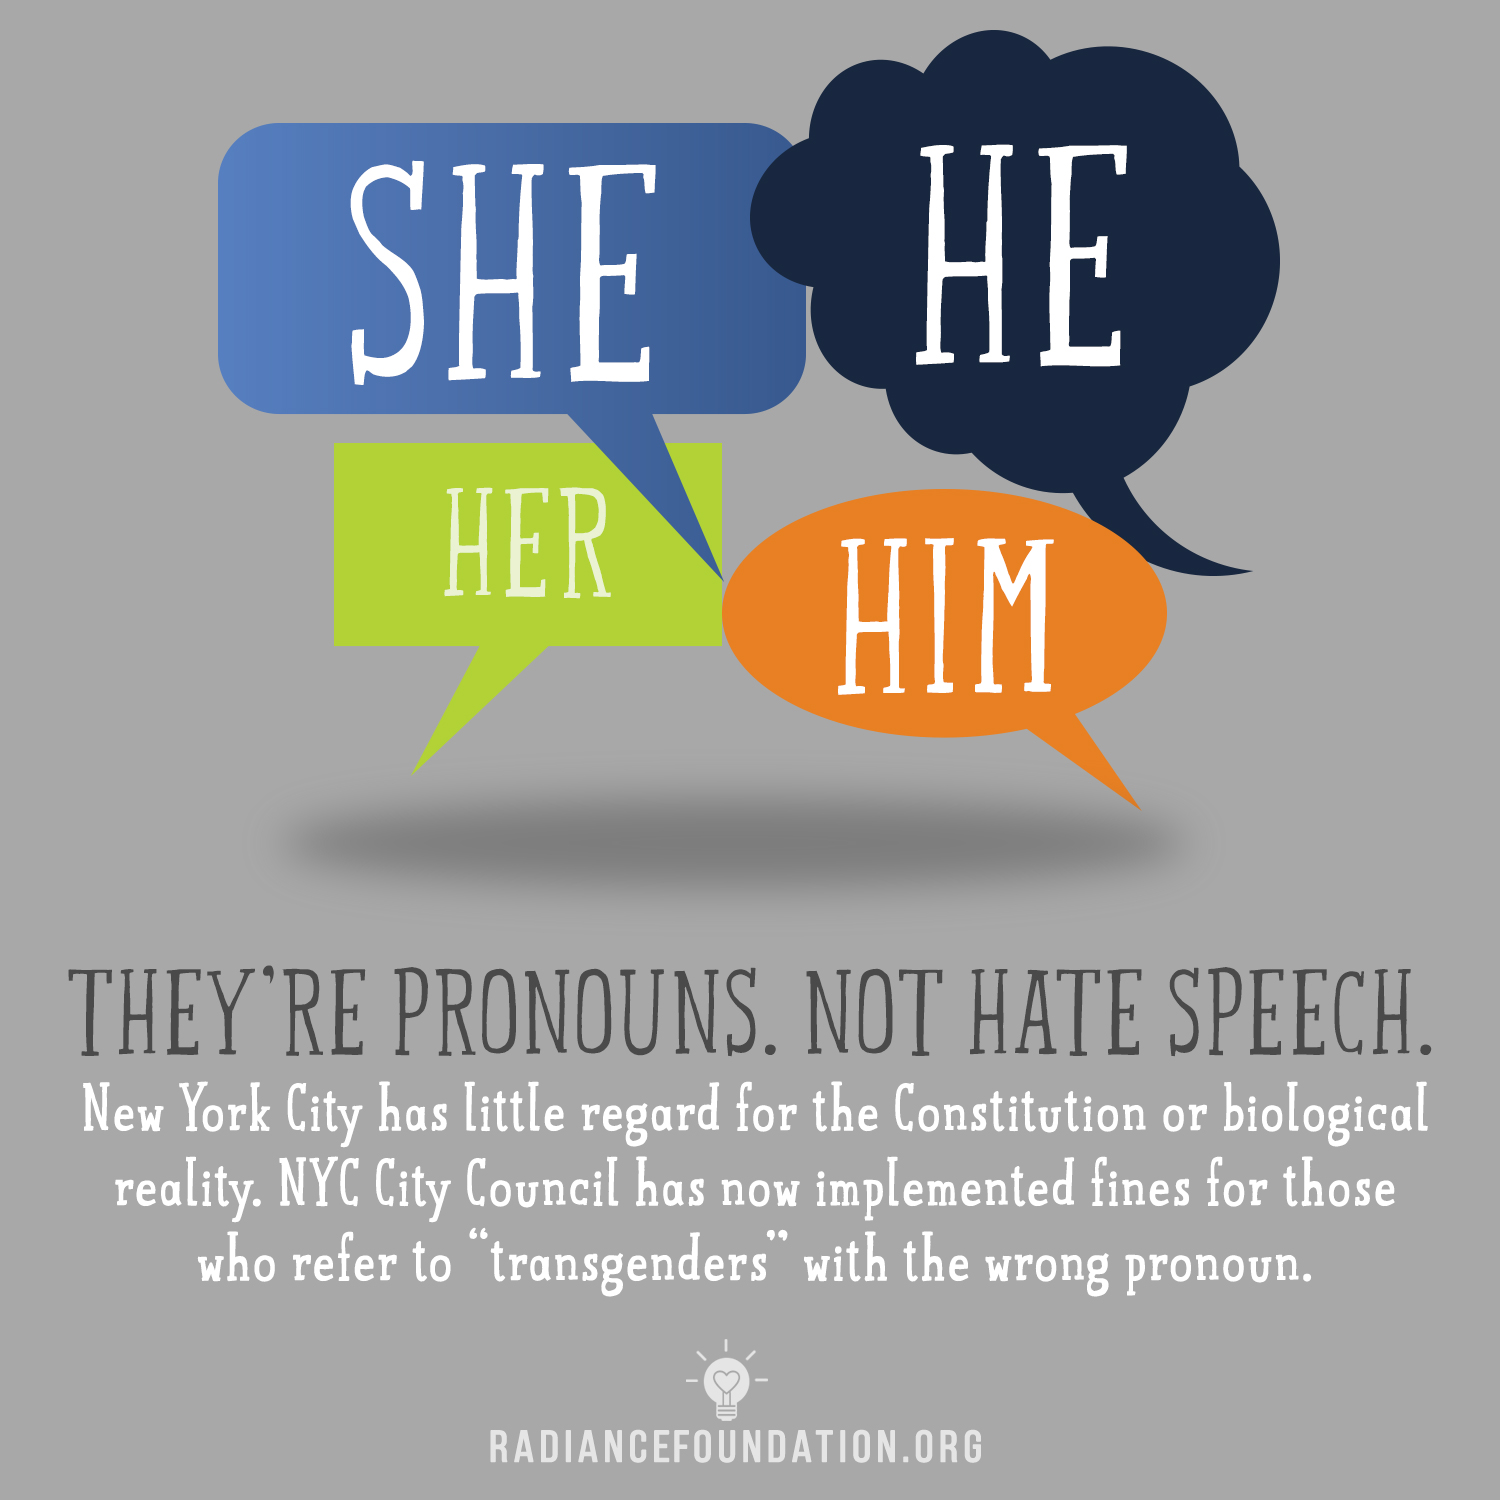 "Pronouns Are Not Hate Speech" by The Radiance Foundation